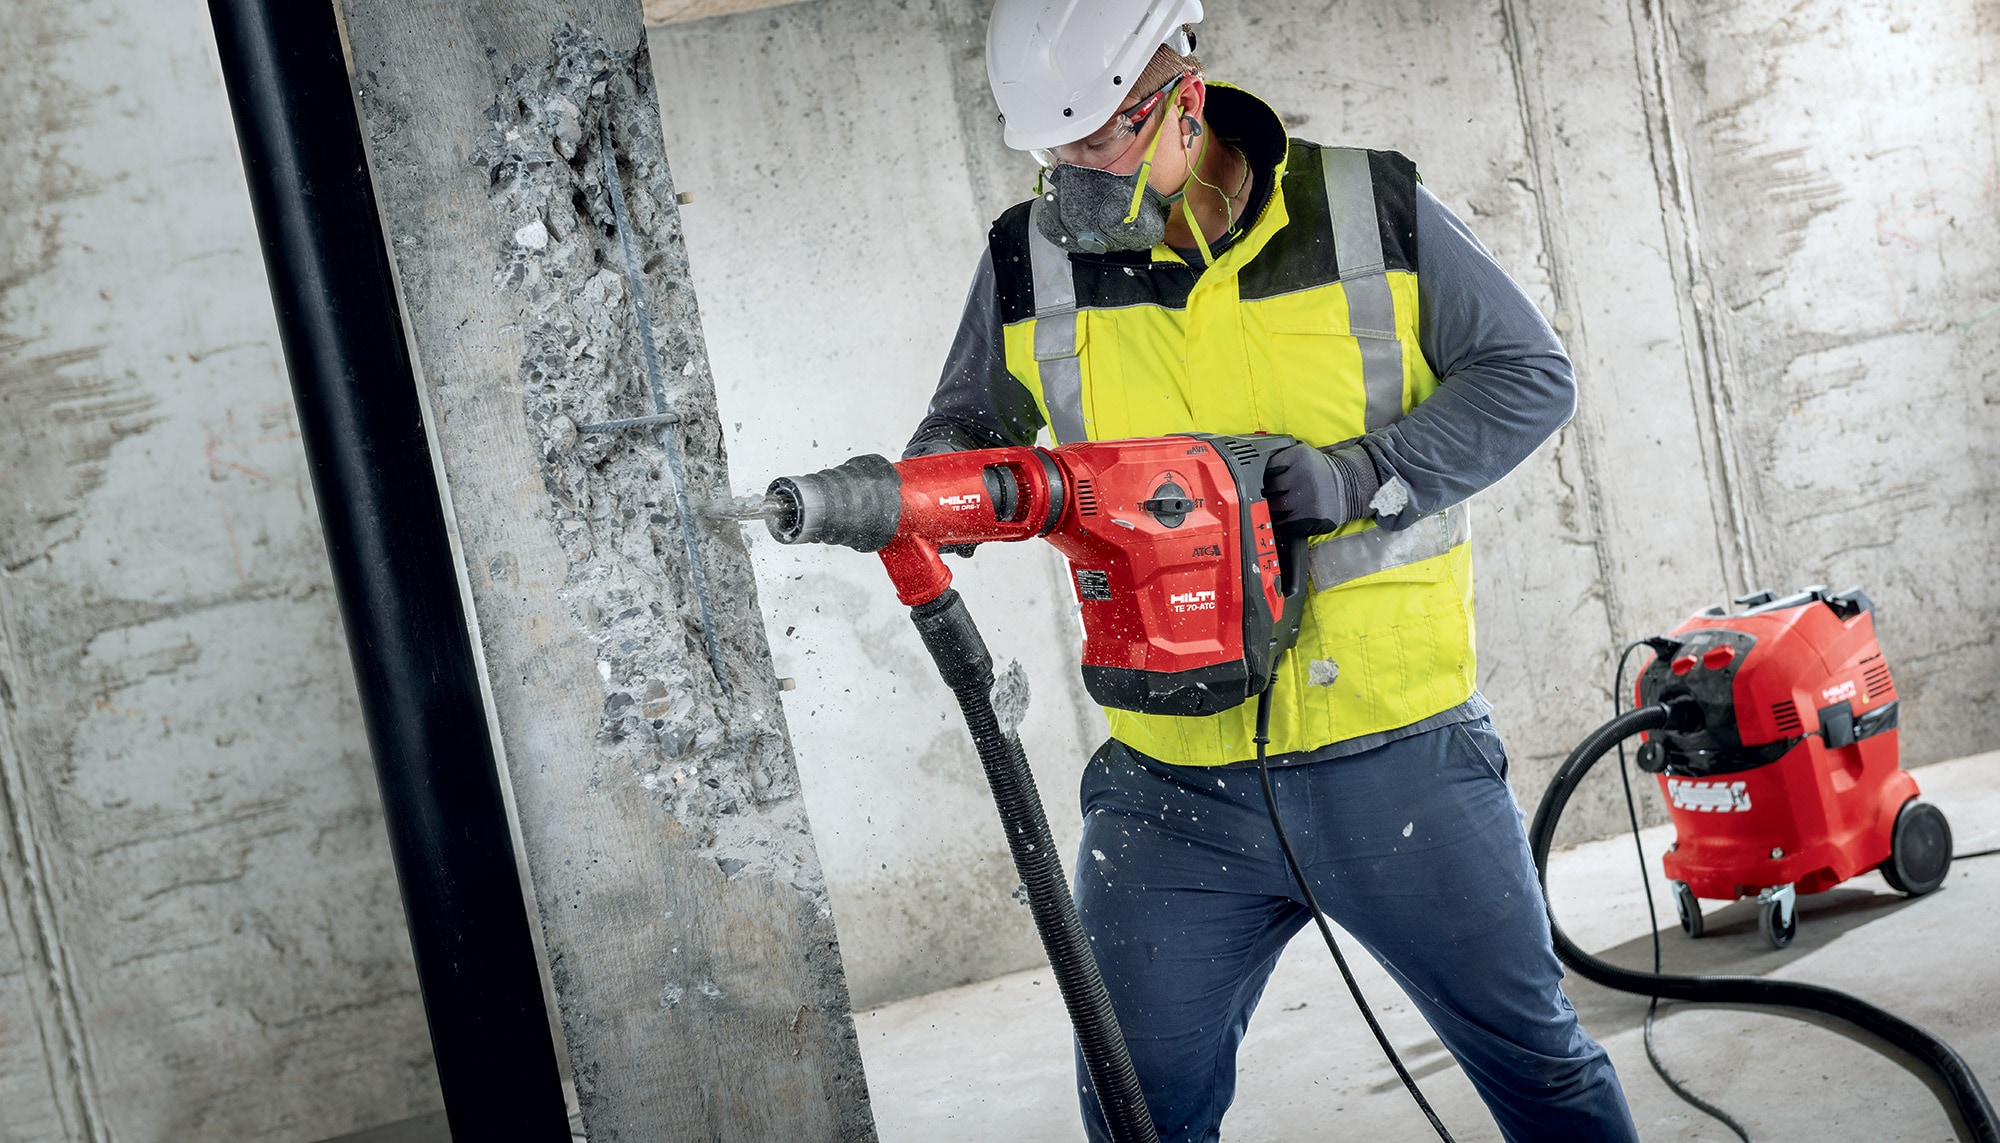 TE 70-ATC/AVR rotary hammer in action